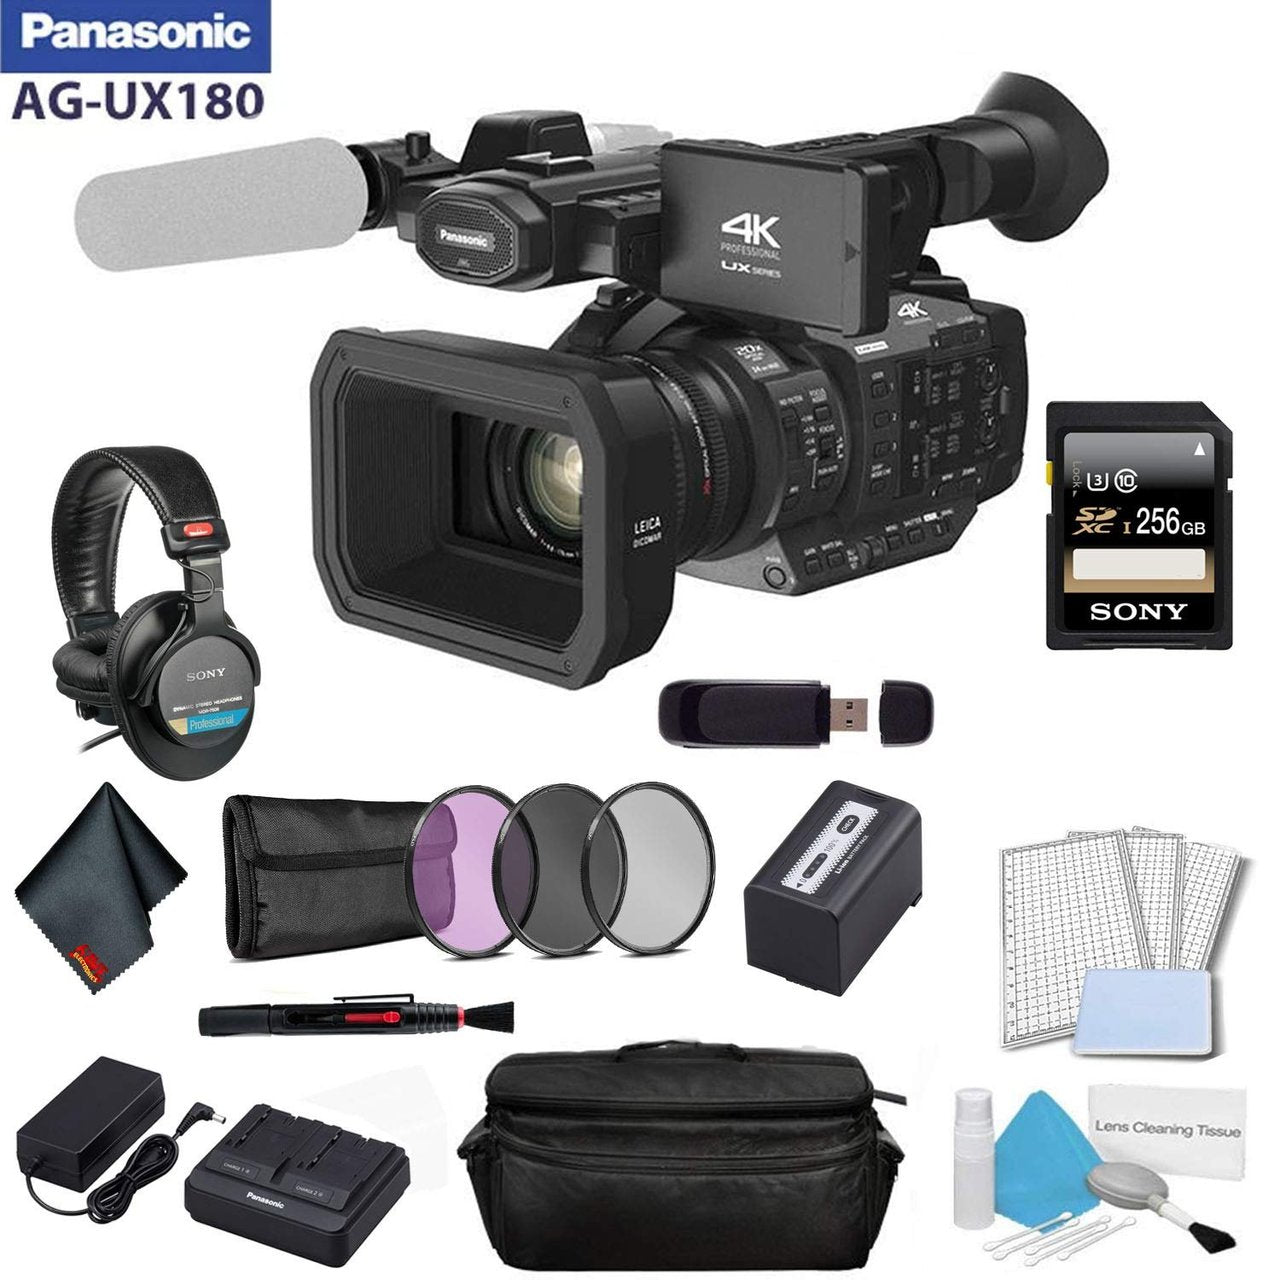 Panasonic AG-UX180 4K Premium Professional Camcorder Bundle with Sony MDR-7506 Headphones + Sony 256GB SDXC Memory Card + More